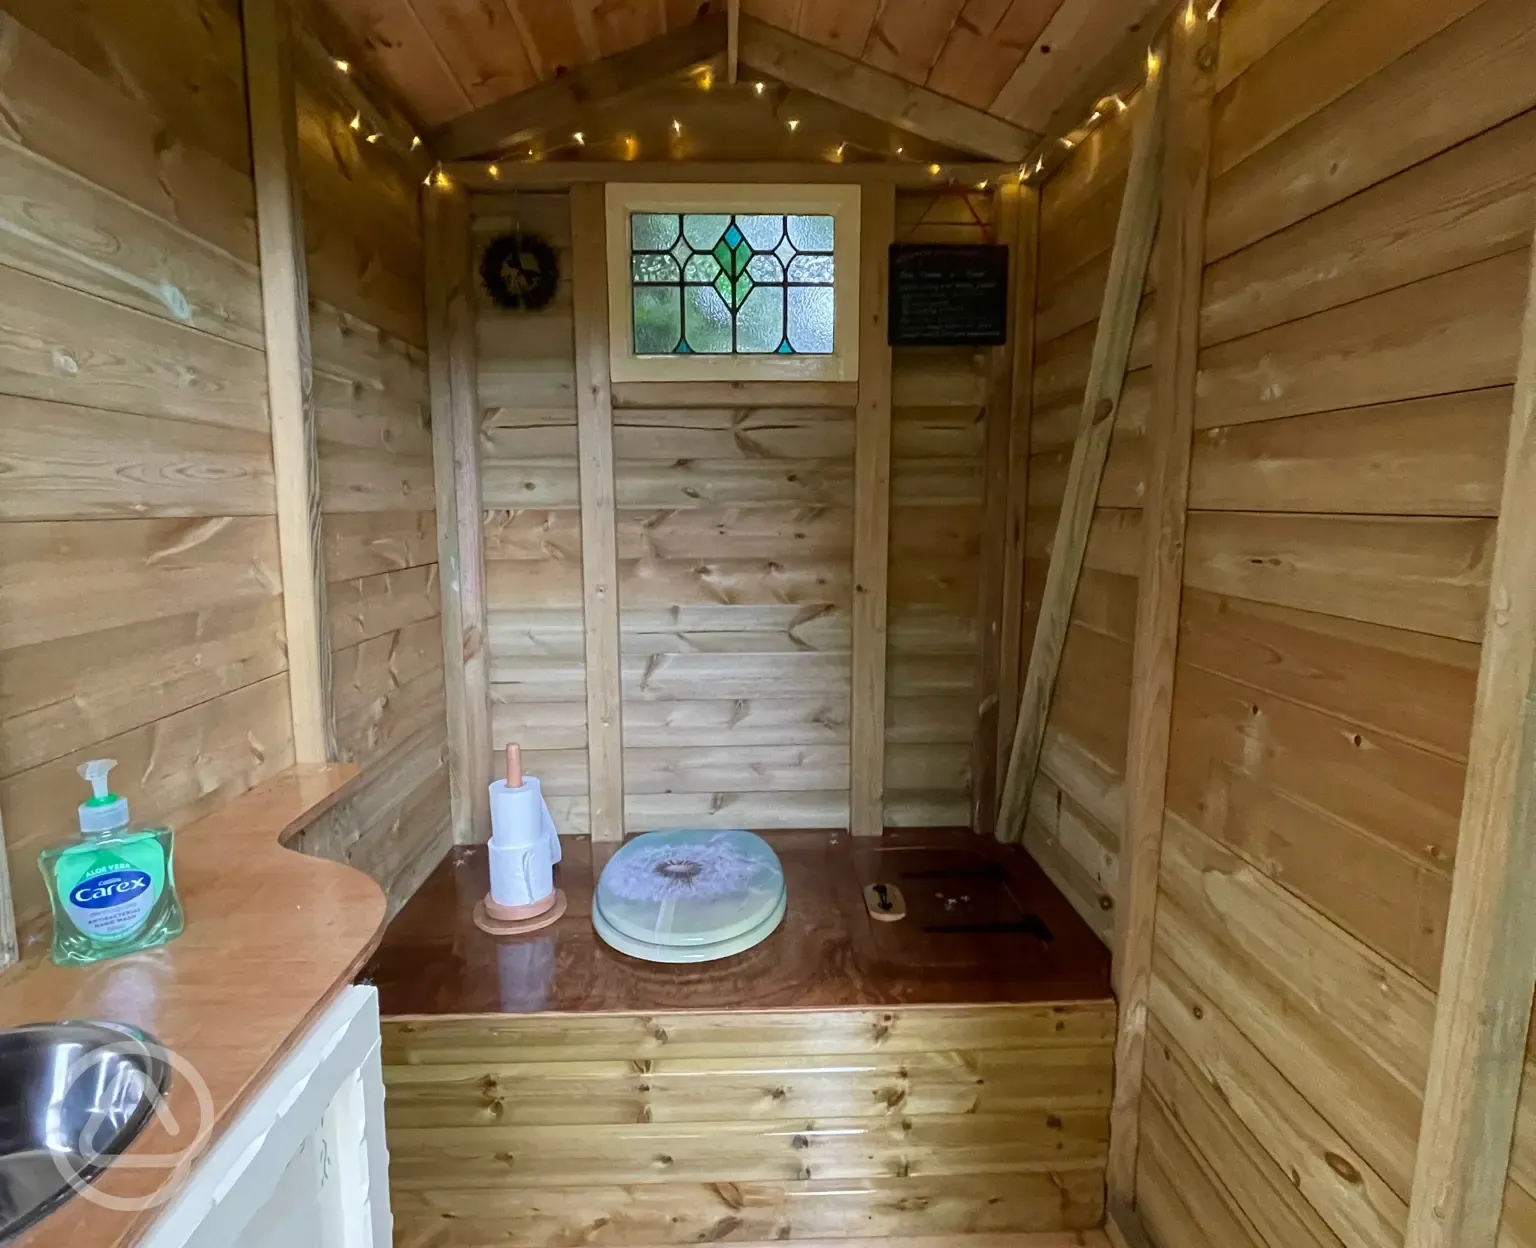 The gypsy van compost toilet with pretty bench seat